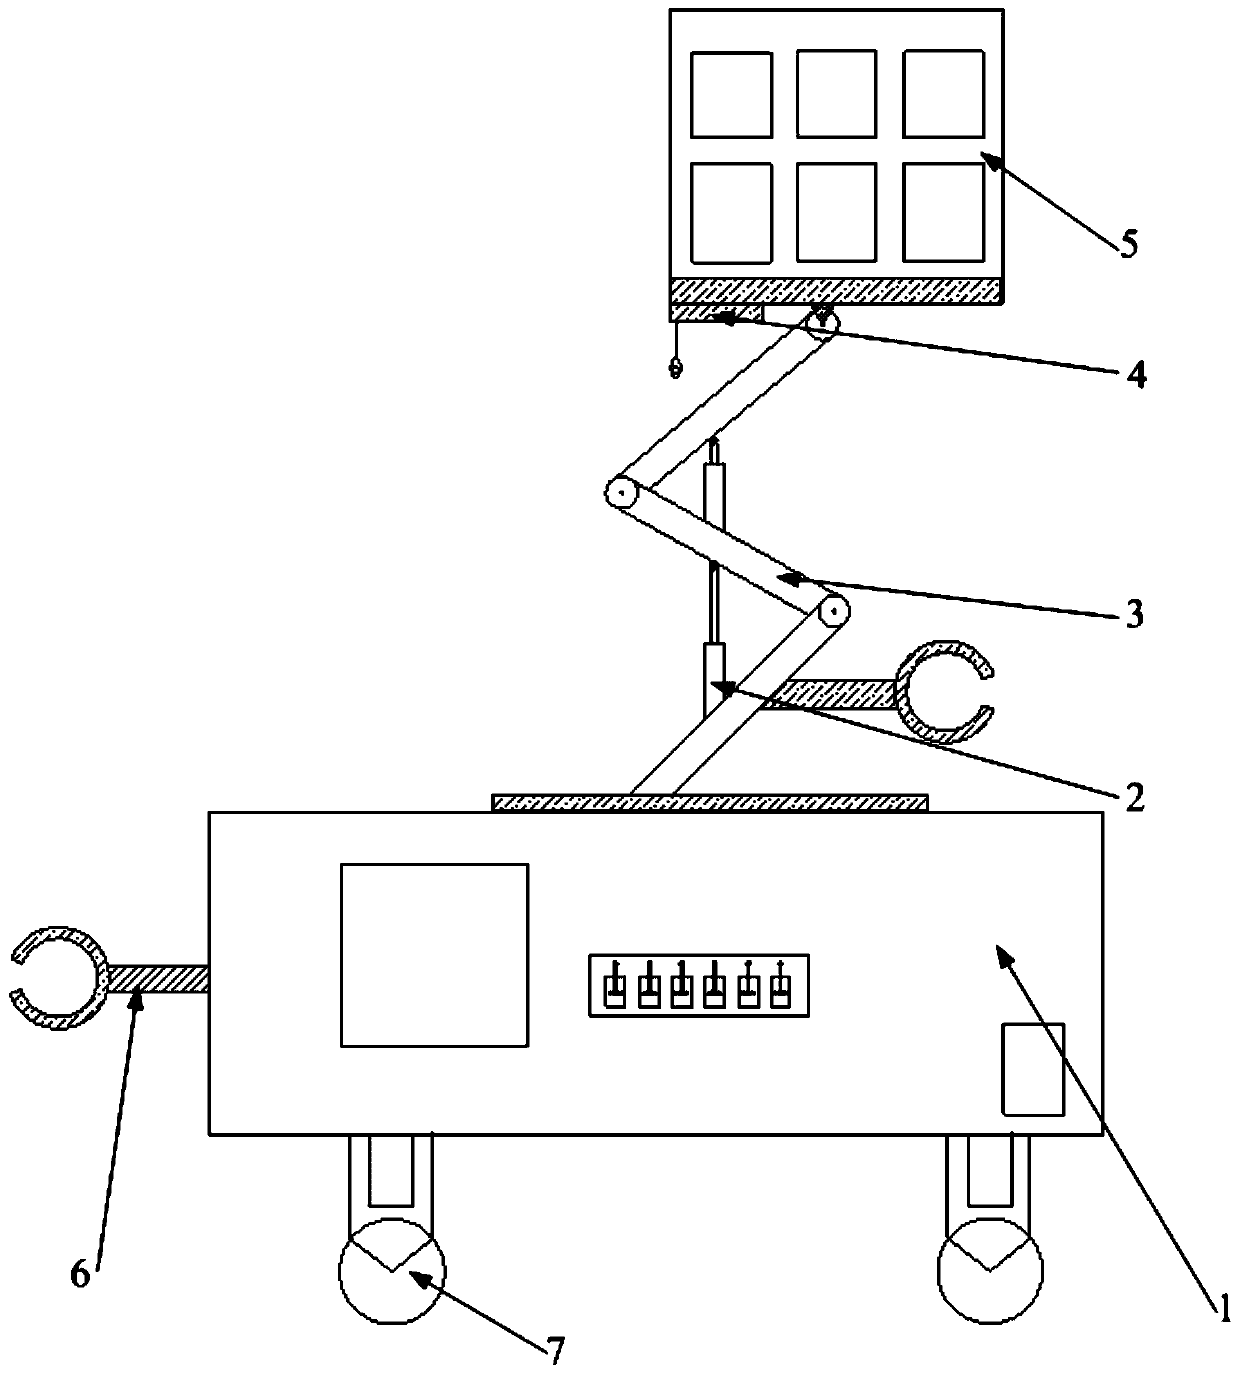 An auxiliary device for maintenance of electrical equipment